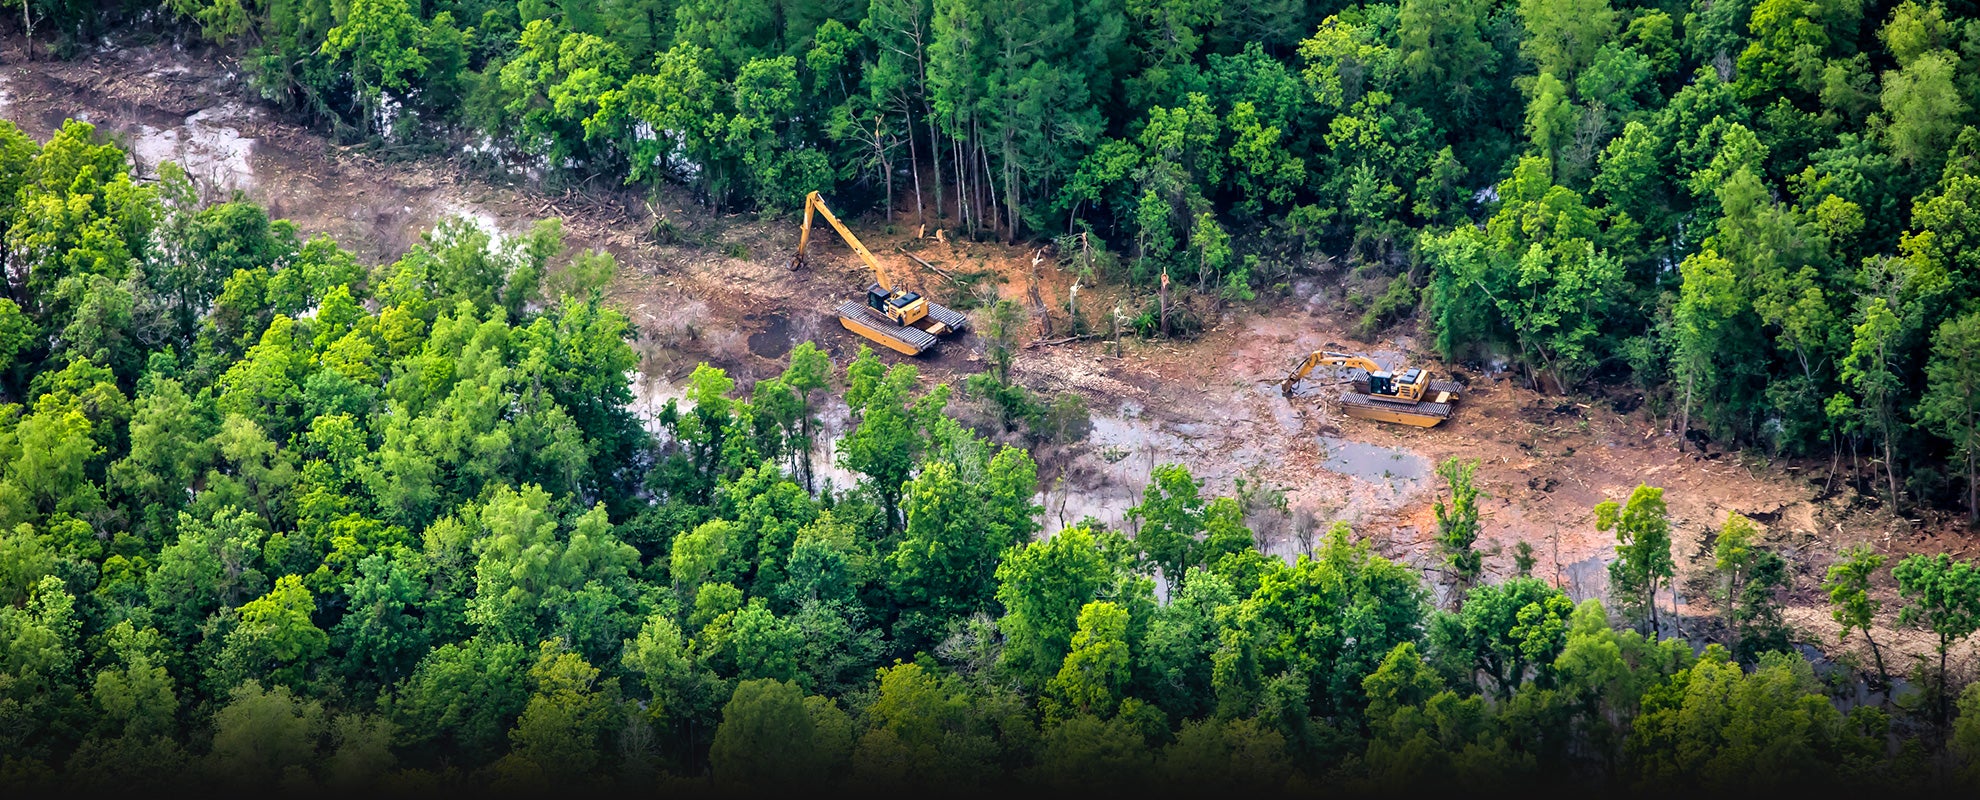 Construction is underway on the Bayou Bridge pipeline in Louisiana’s Atchafalaya Basin, even though a state judge recently ruled that Energy Transfer Partners’ use permit failed to consider the pipeline’s impact on a nearby community.